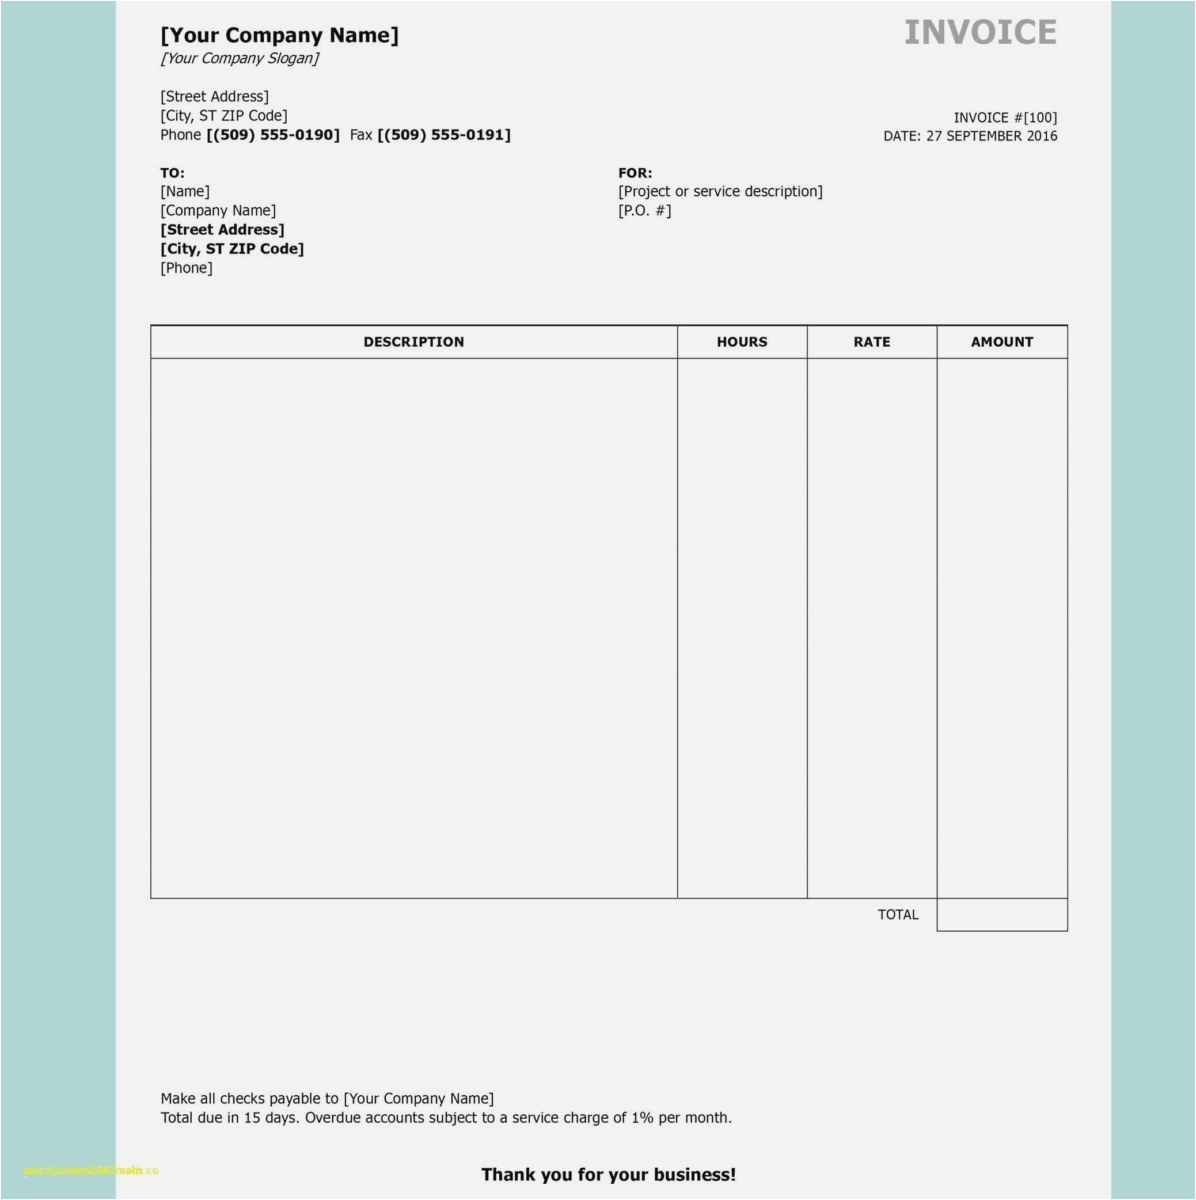 Invoice Letter Template - Bussiness Letter Example Inspirational Business Letter Template